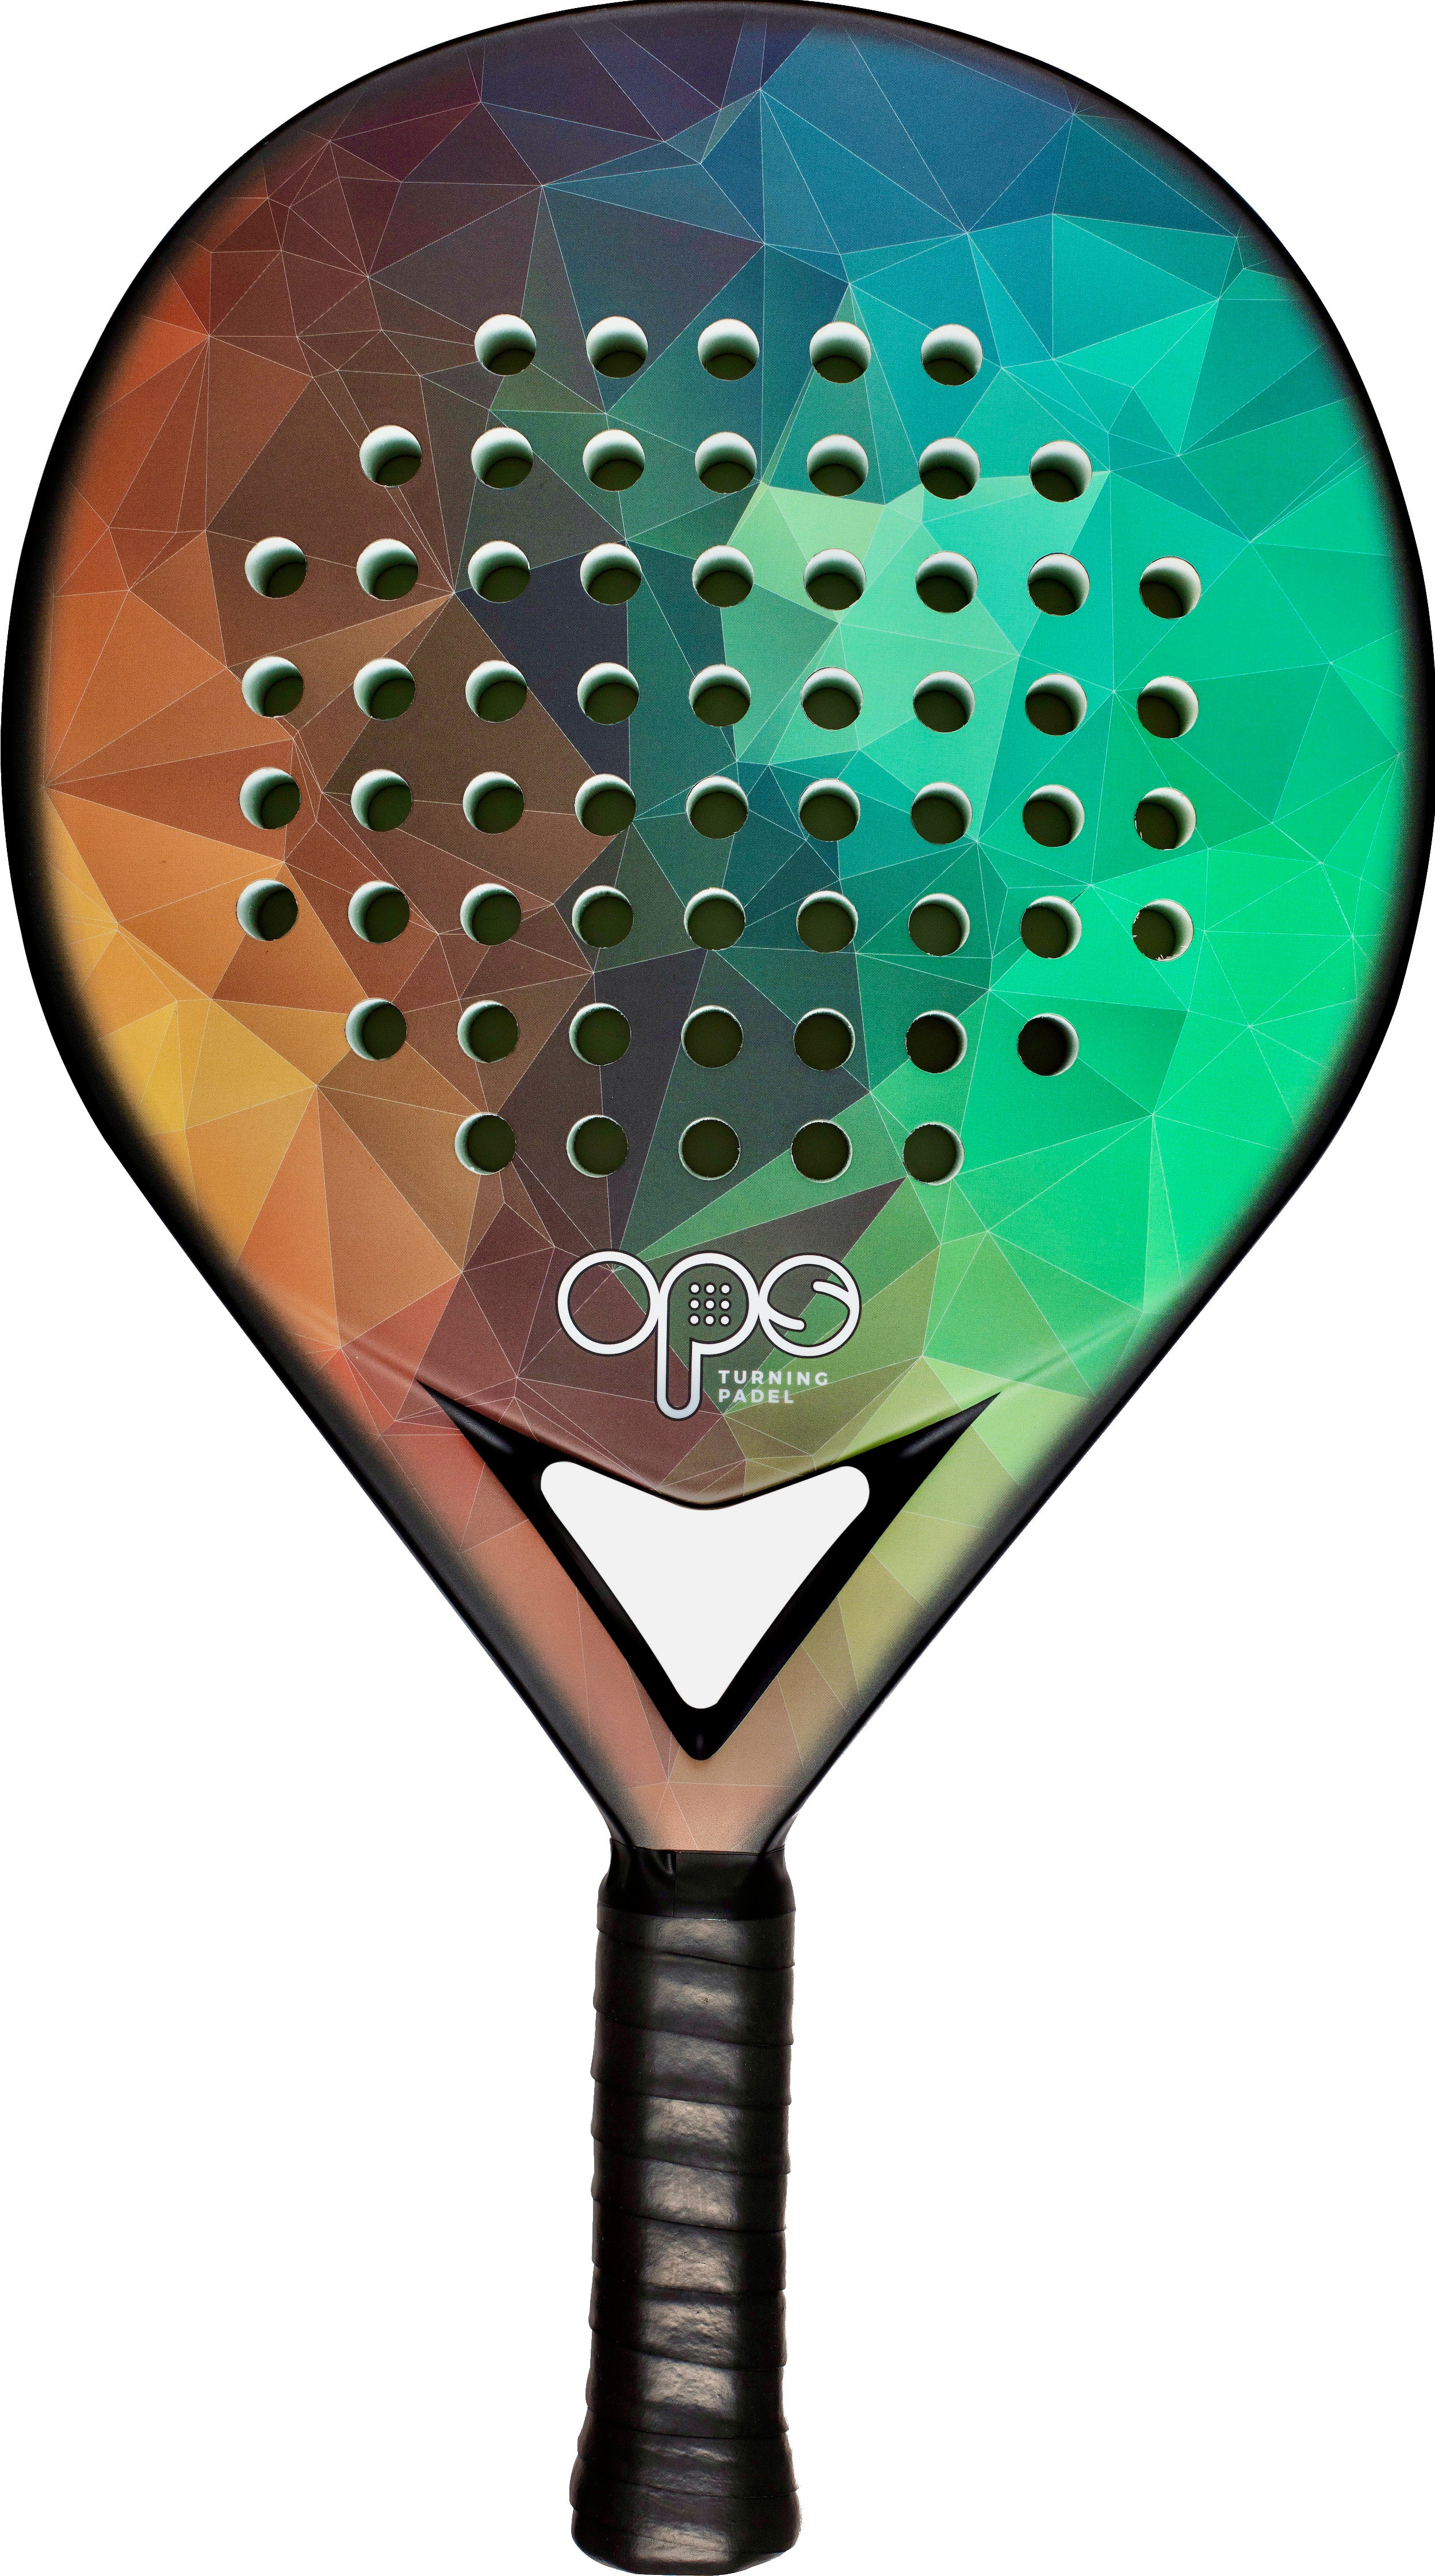 Introducing the one-hole padel racket! - The Padel Paper